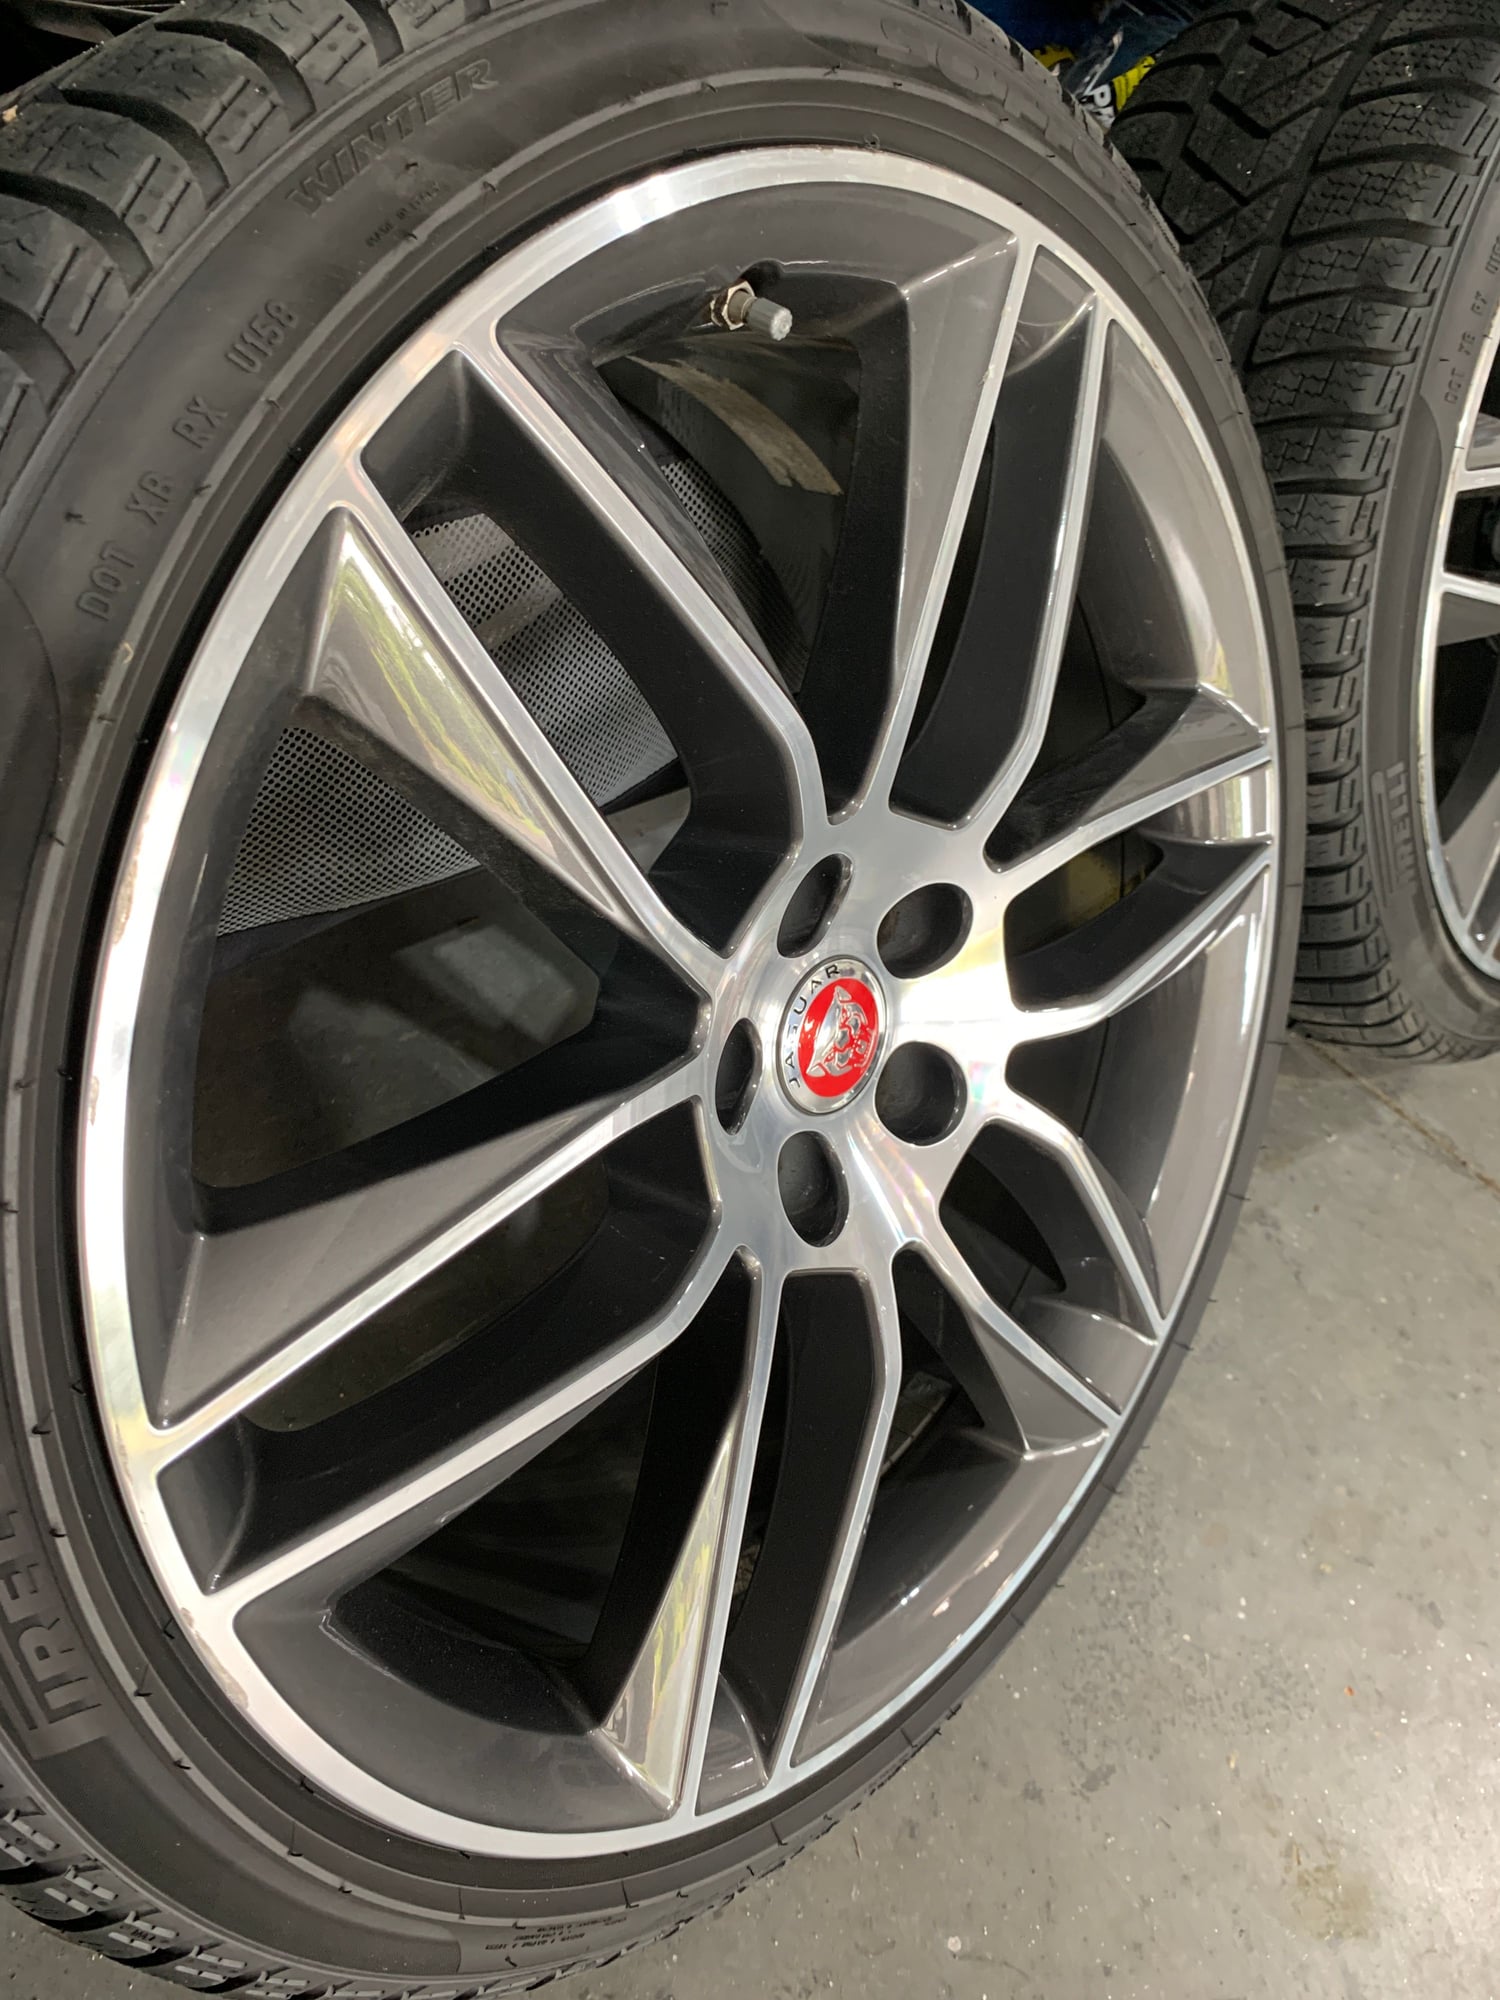 Wheels and Tires/Axles - F-Type R OEM 20" Staggered Wheels with Pirelli Winter Sottozero 3 Snow Tires w/ TPMS - Used - All Years Jaguar F-Type - Falmouth, ME 04105, United States